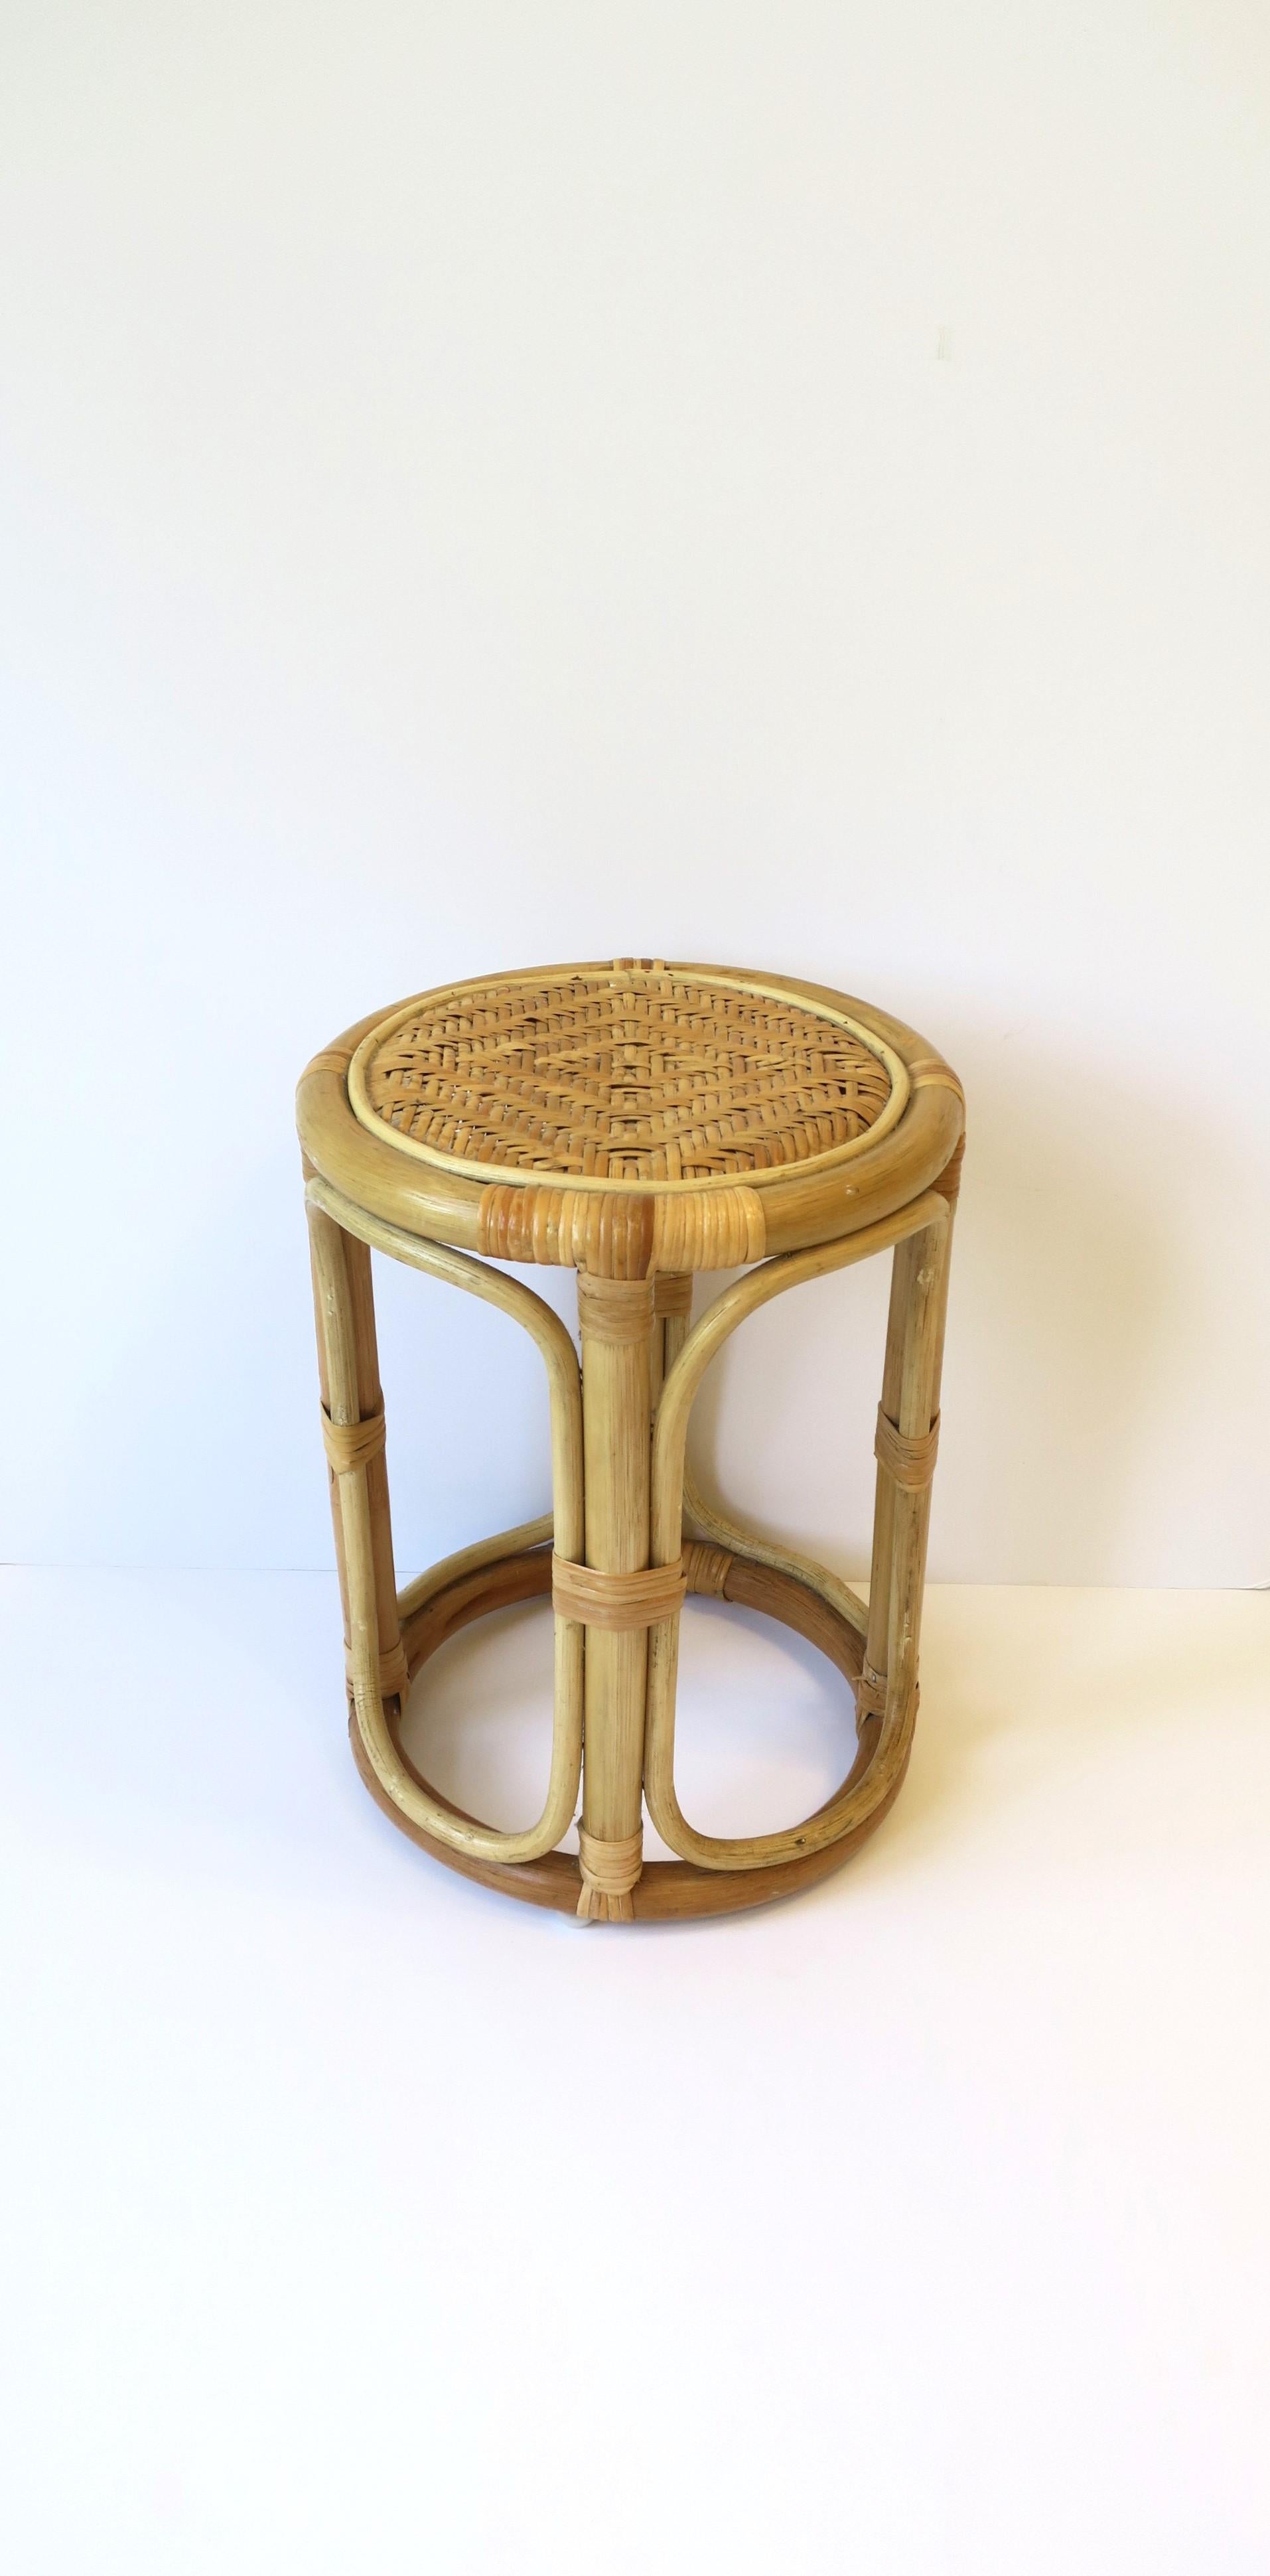 A small wicker rattan stool or drinks table. A great piece that's easy to move around. Convenient as a seat, or as a small drinks table providing there's a stable environment on top (shown with small book.) Piece may work well indoors or under a